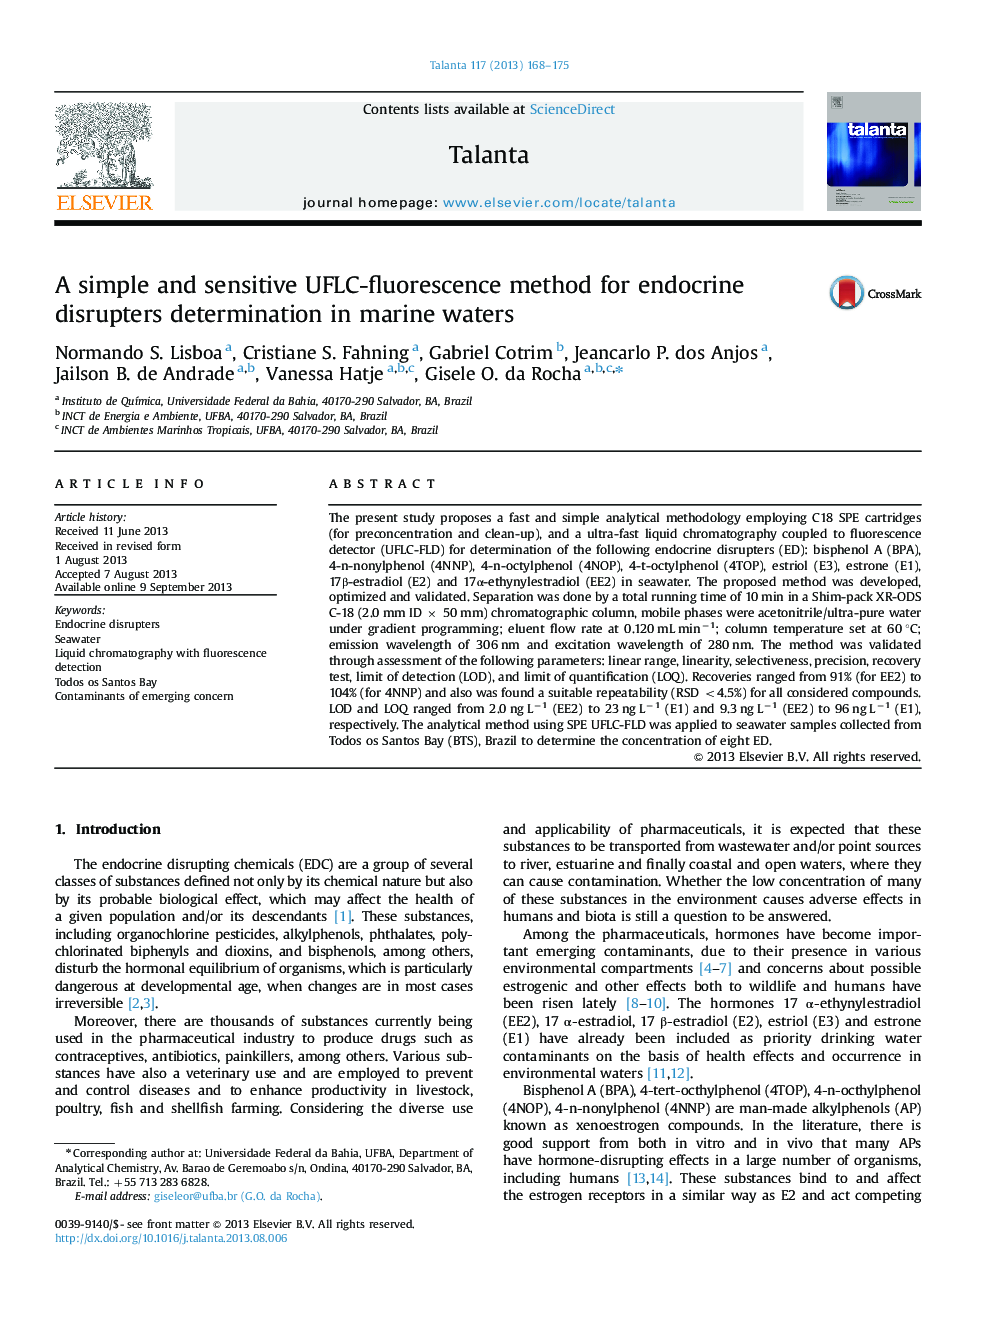 A simple and sensitive UFLC-fluorescence method for endocrine disrupters determination in marine waters